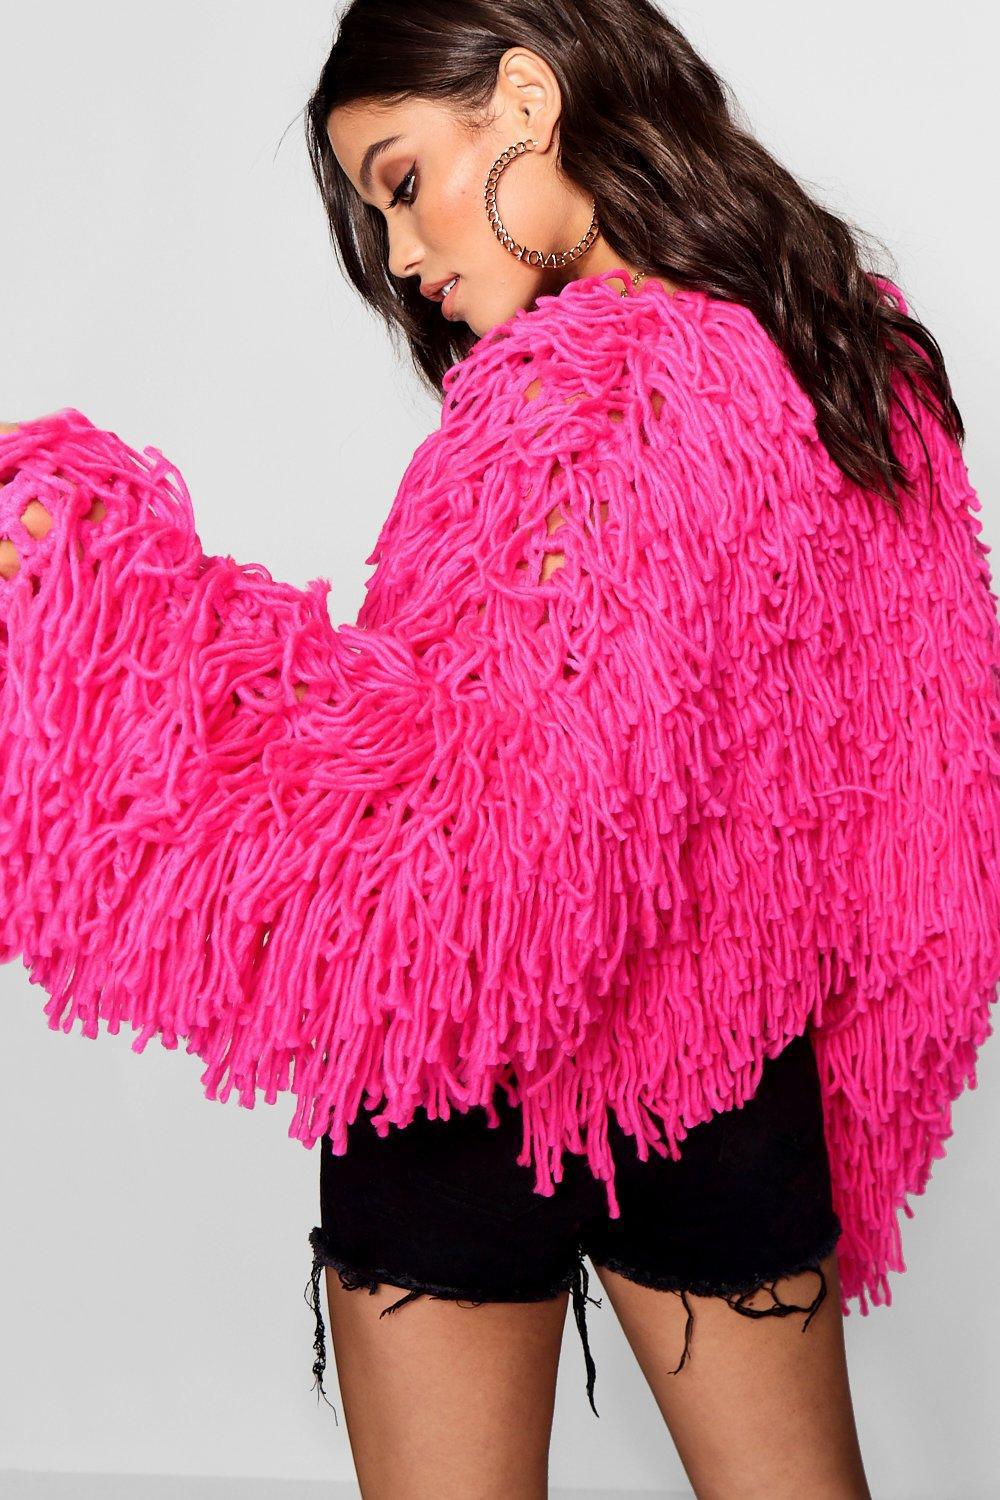 Boohoo Synthetic Cropped Shaggy Knit Cardigan in Fuchsia (Pink) - Lyst